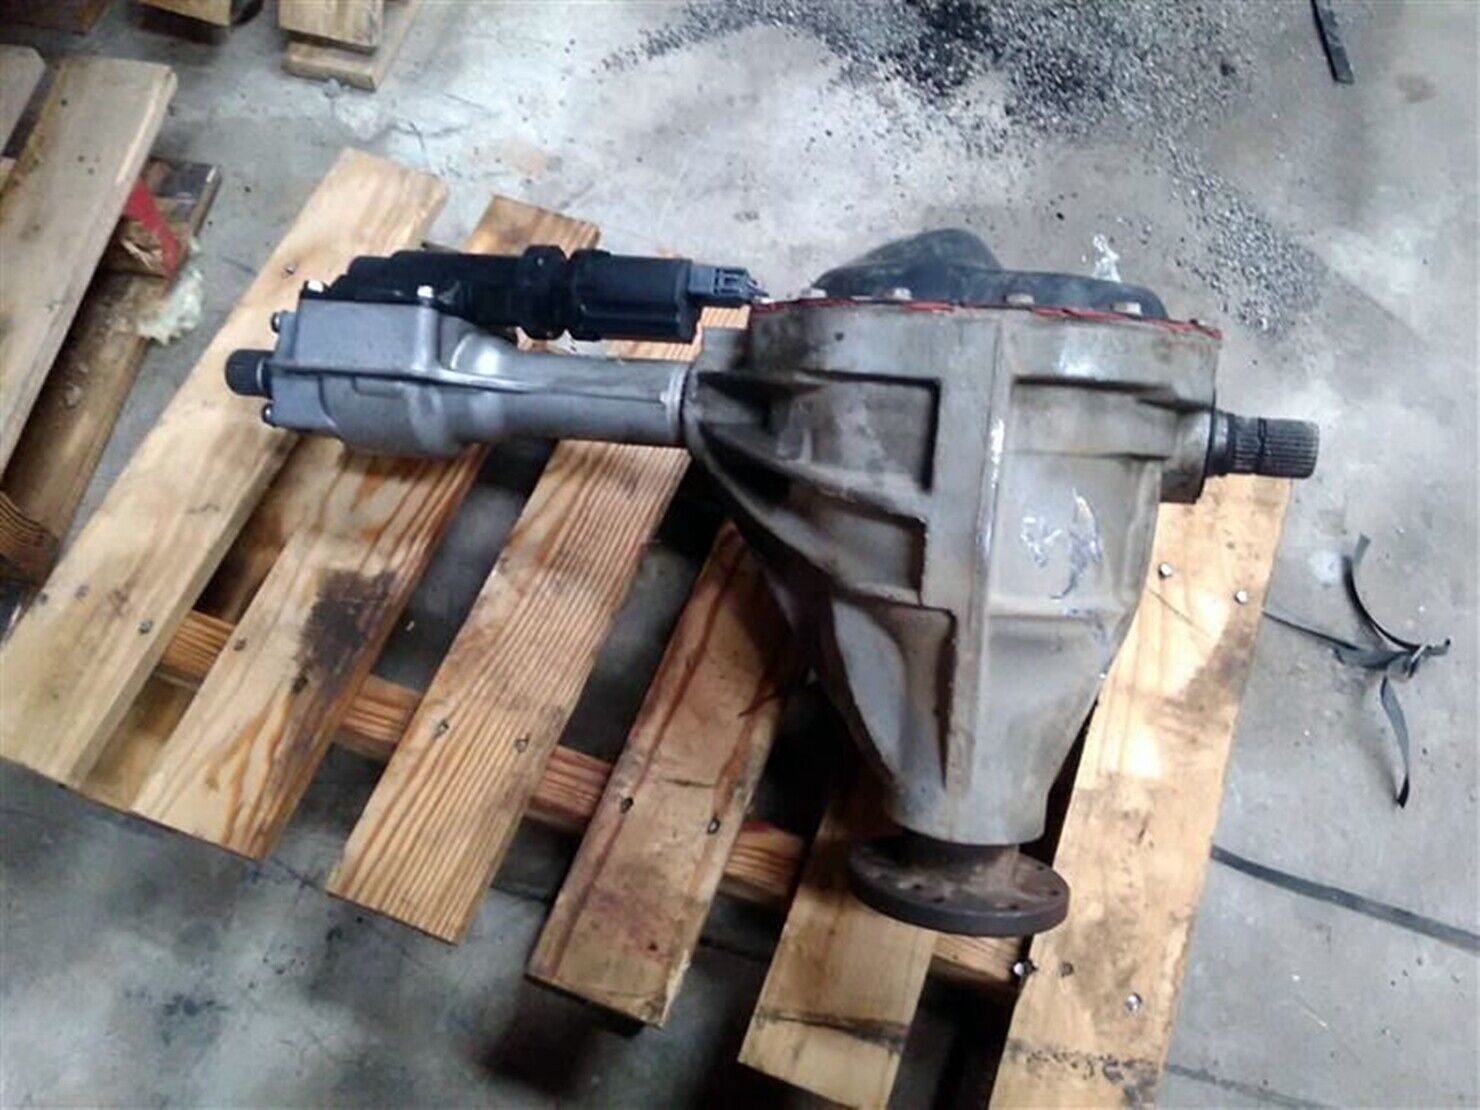 Used 2006-2011 Dodge Ram 1500 Front Axle Differential Carrier 3.55 2011 Dodge Ram 1500 Gear Ratio